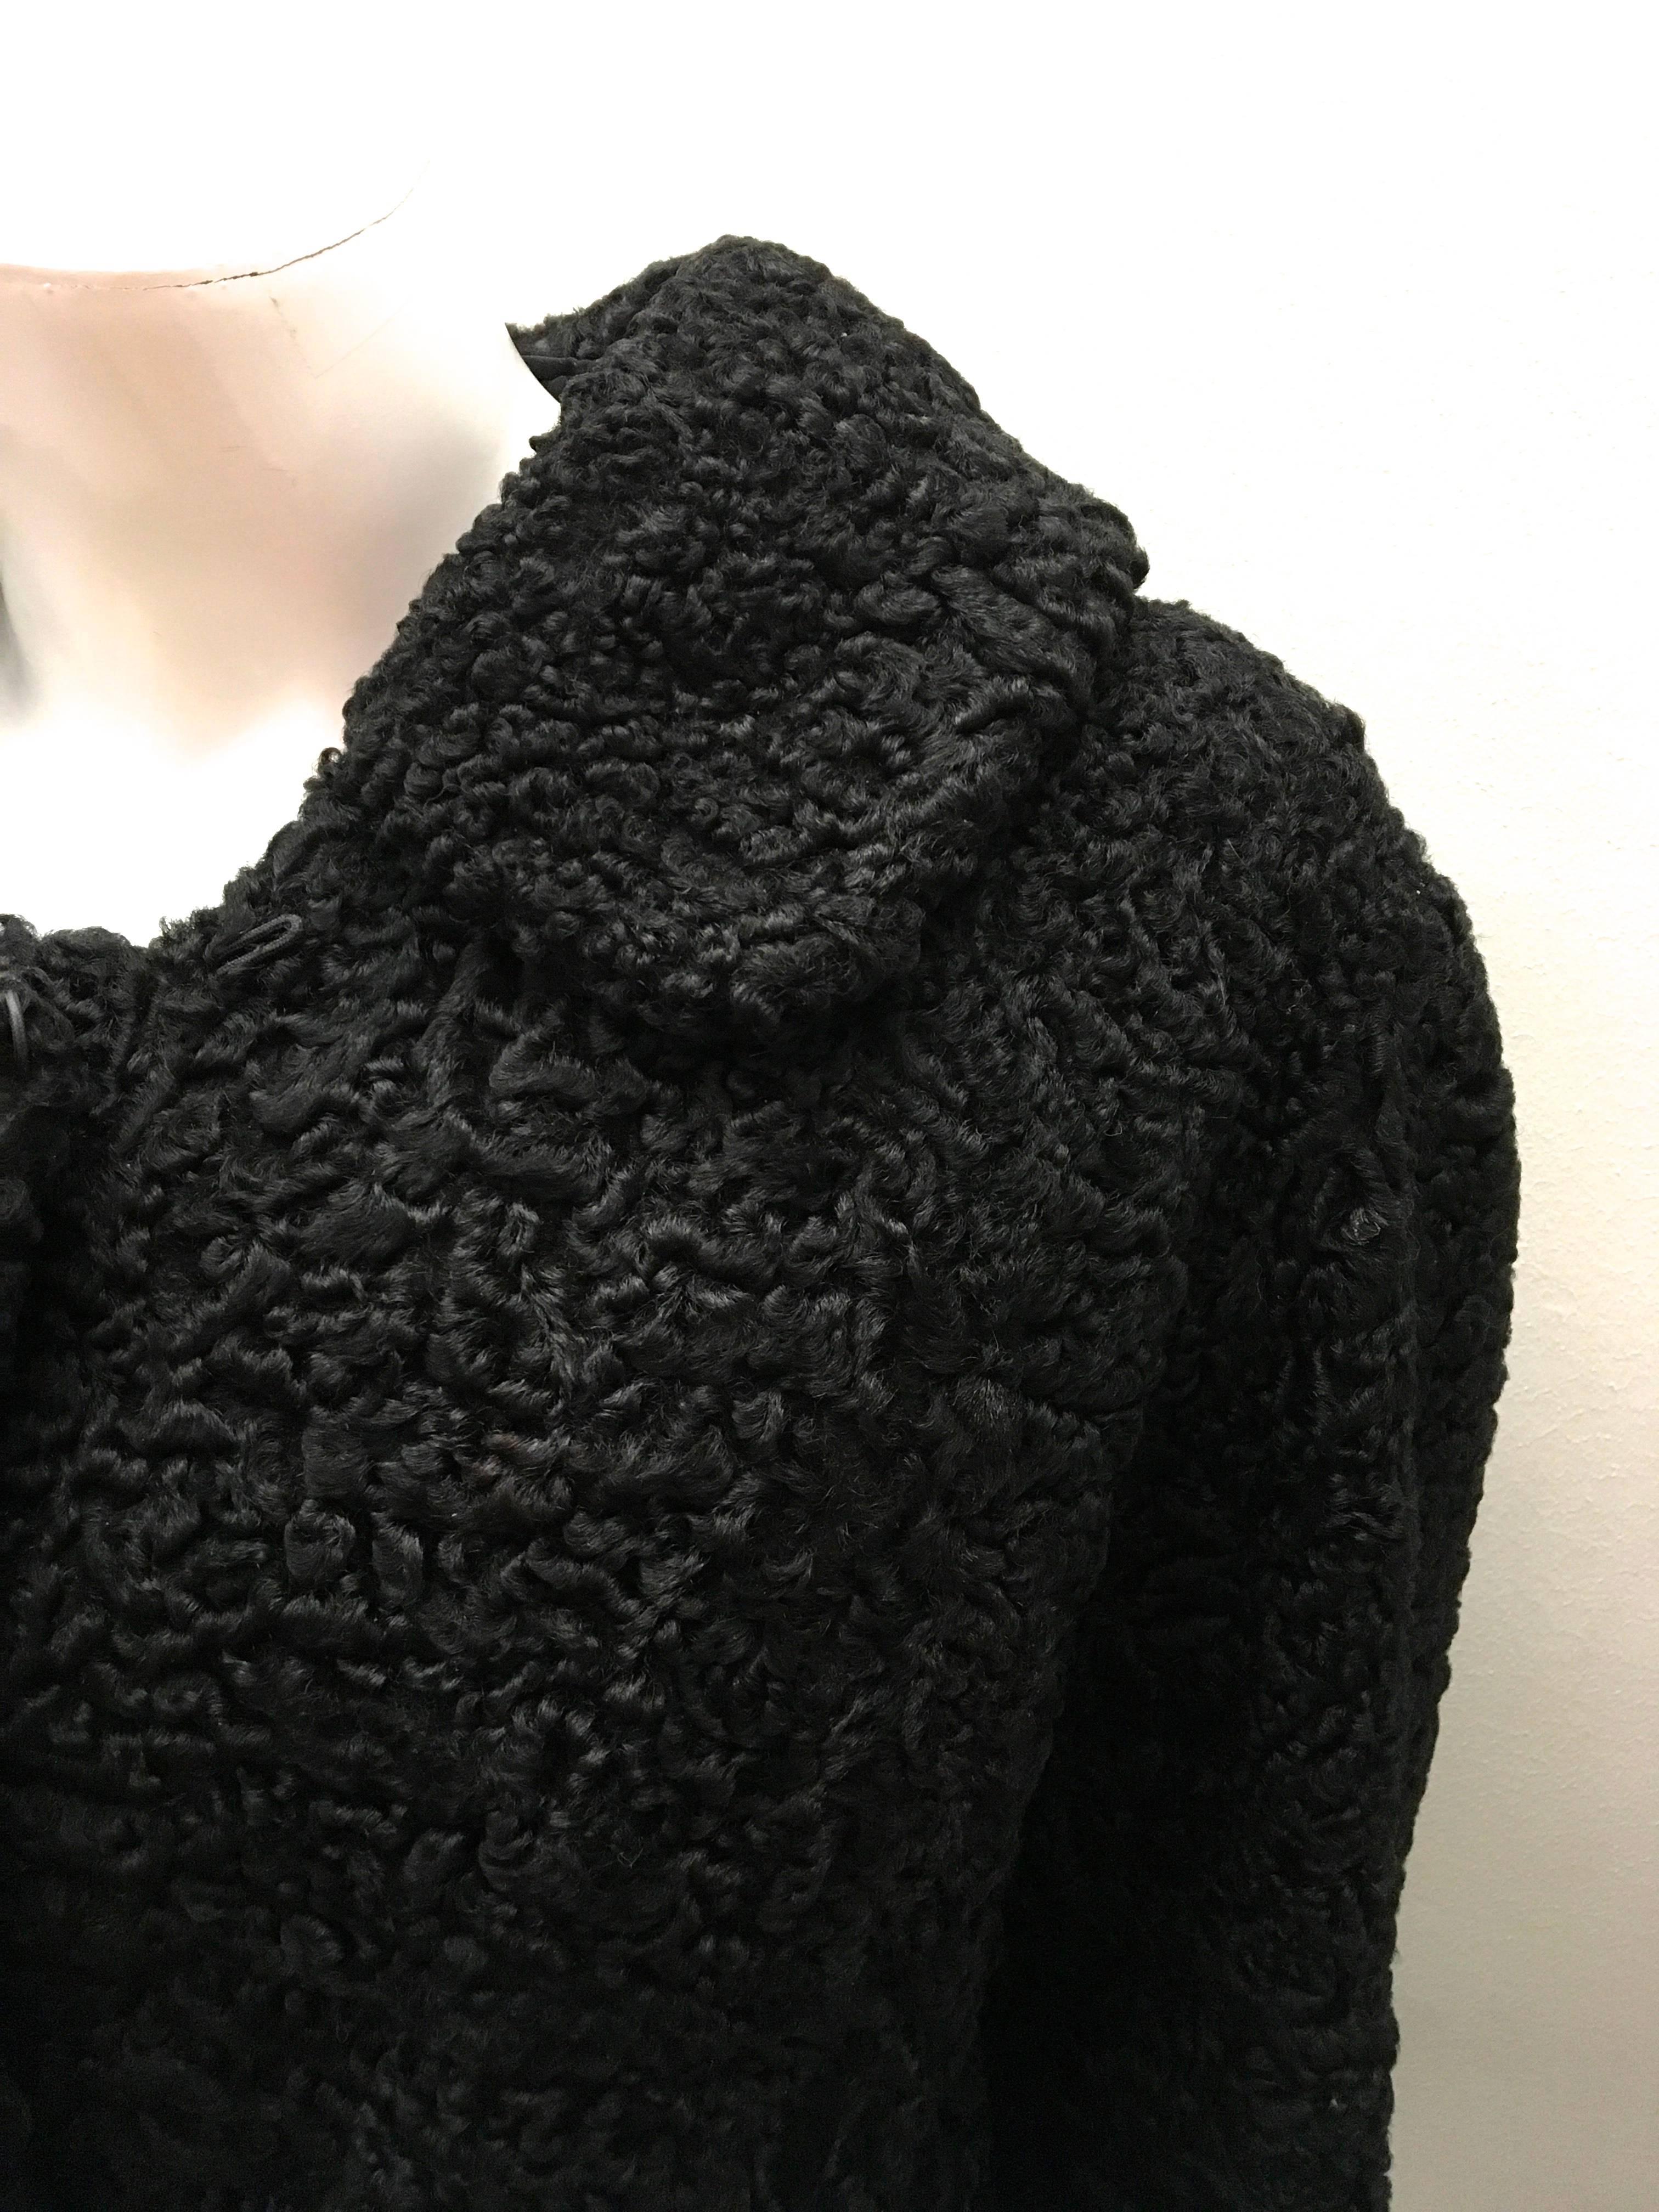 Presented here is a gorgeous persian lamb jacket. This beautiful jacket is colored black and is made entirely out of a soft Persian lamb. The unique look that Persian lamb has makes for a beautiful and timeless look. There are large buttons also